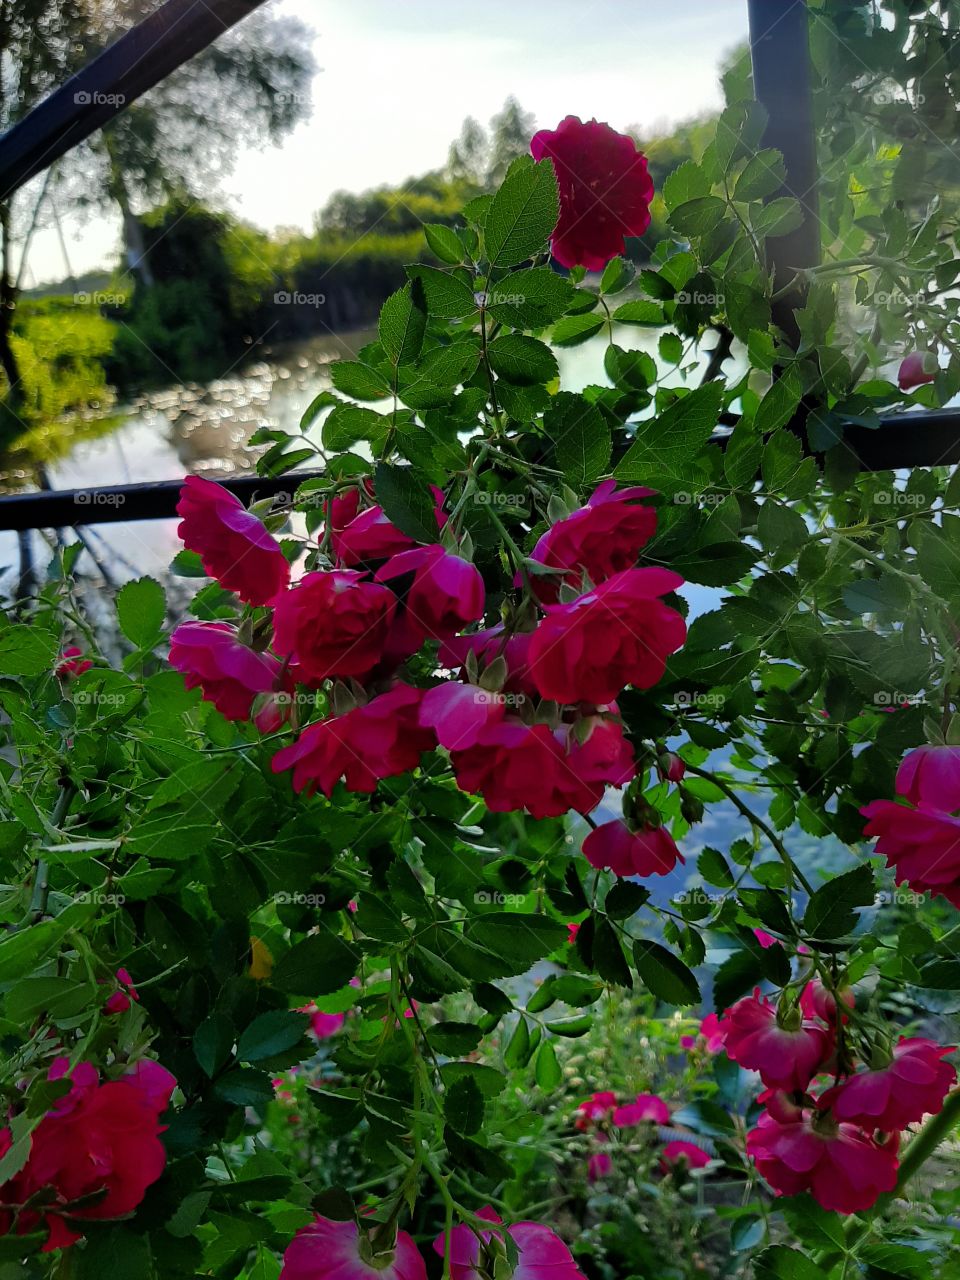 Red roses grow by the water